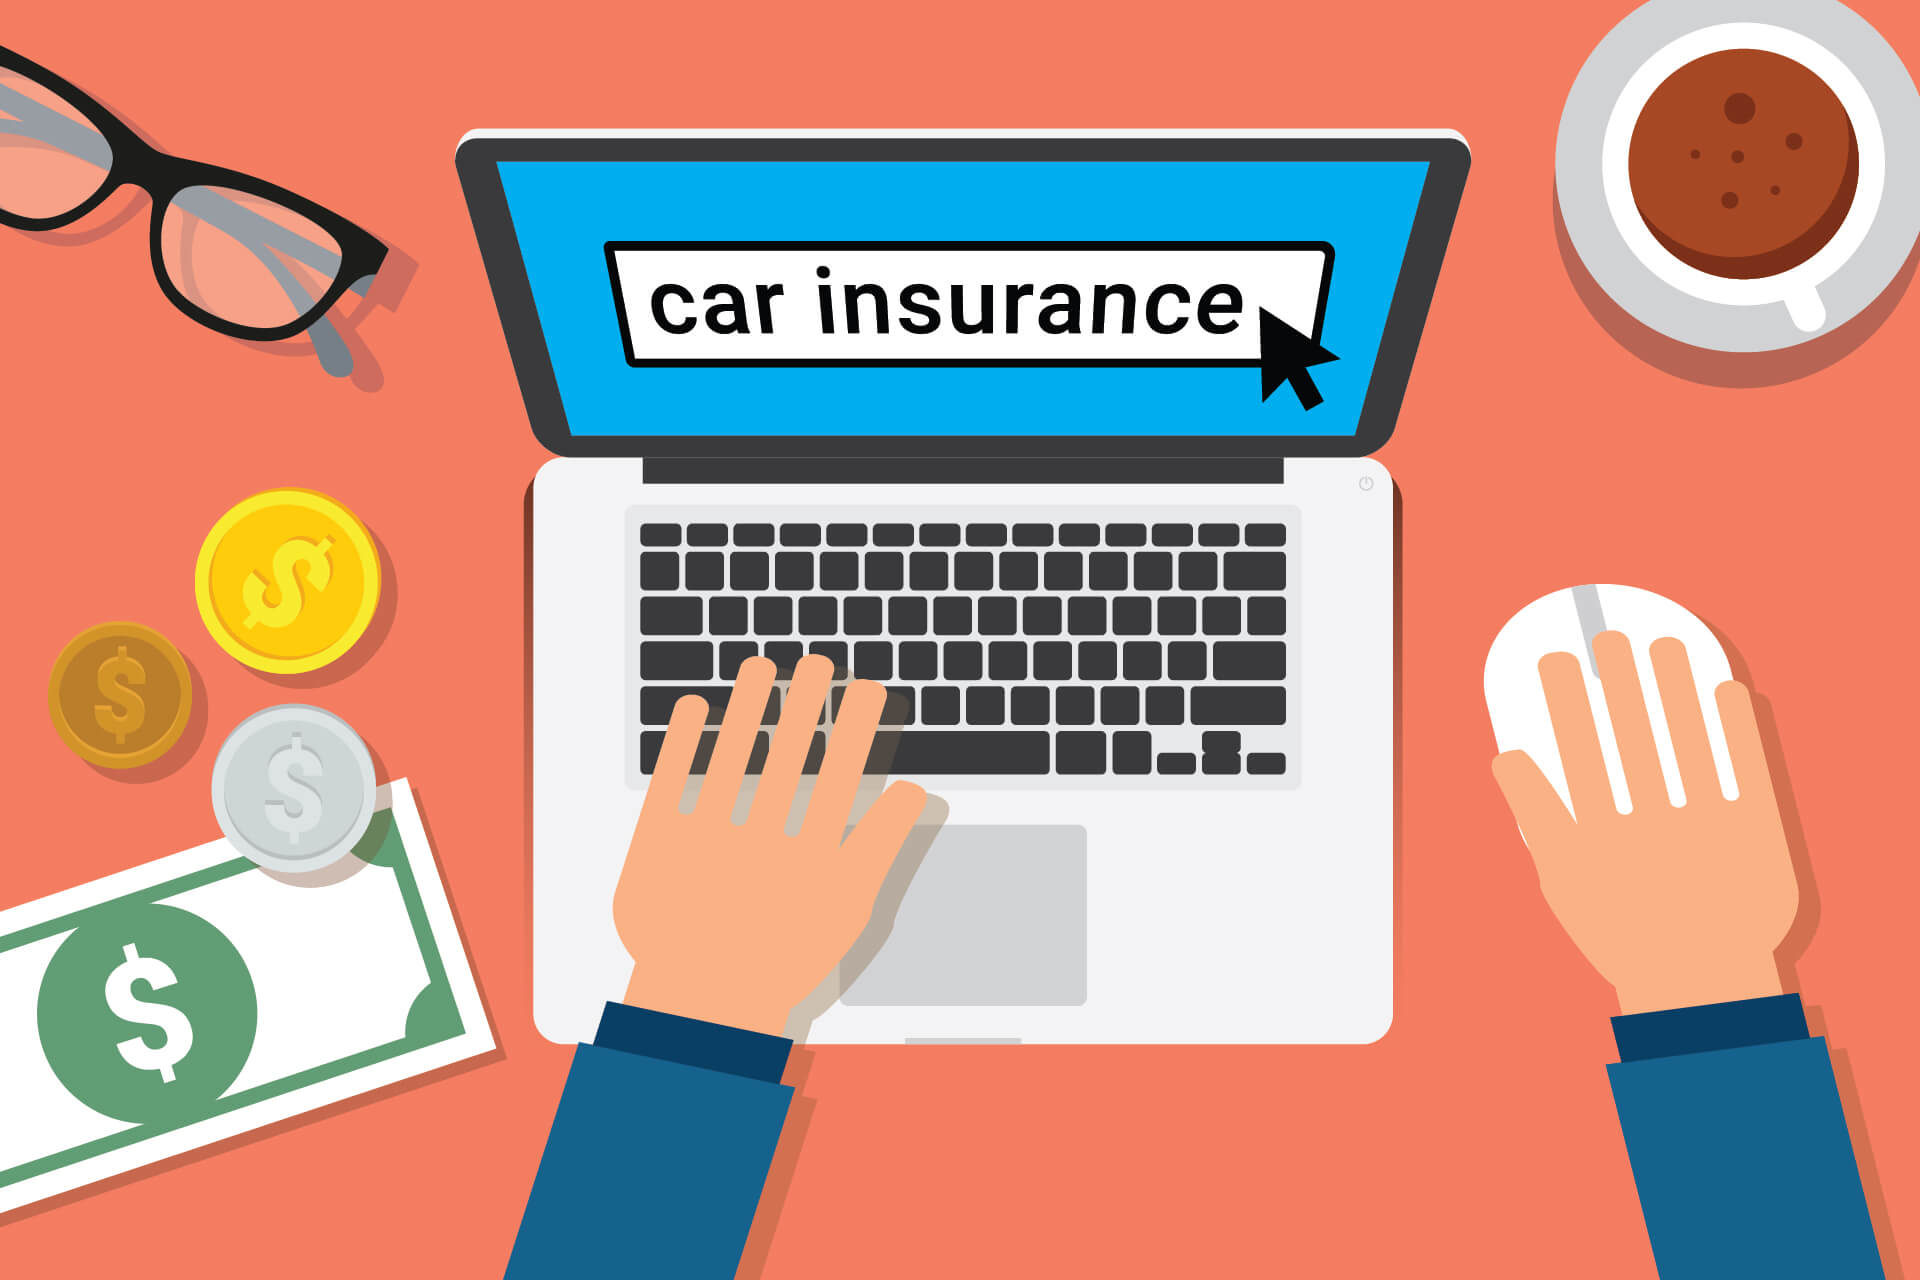 Car insurance search concept free image download